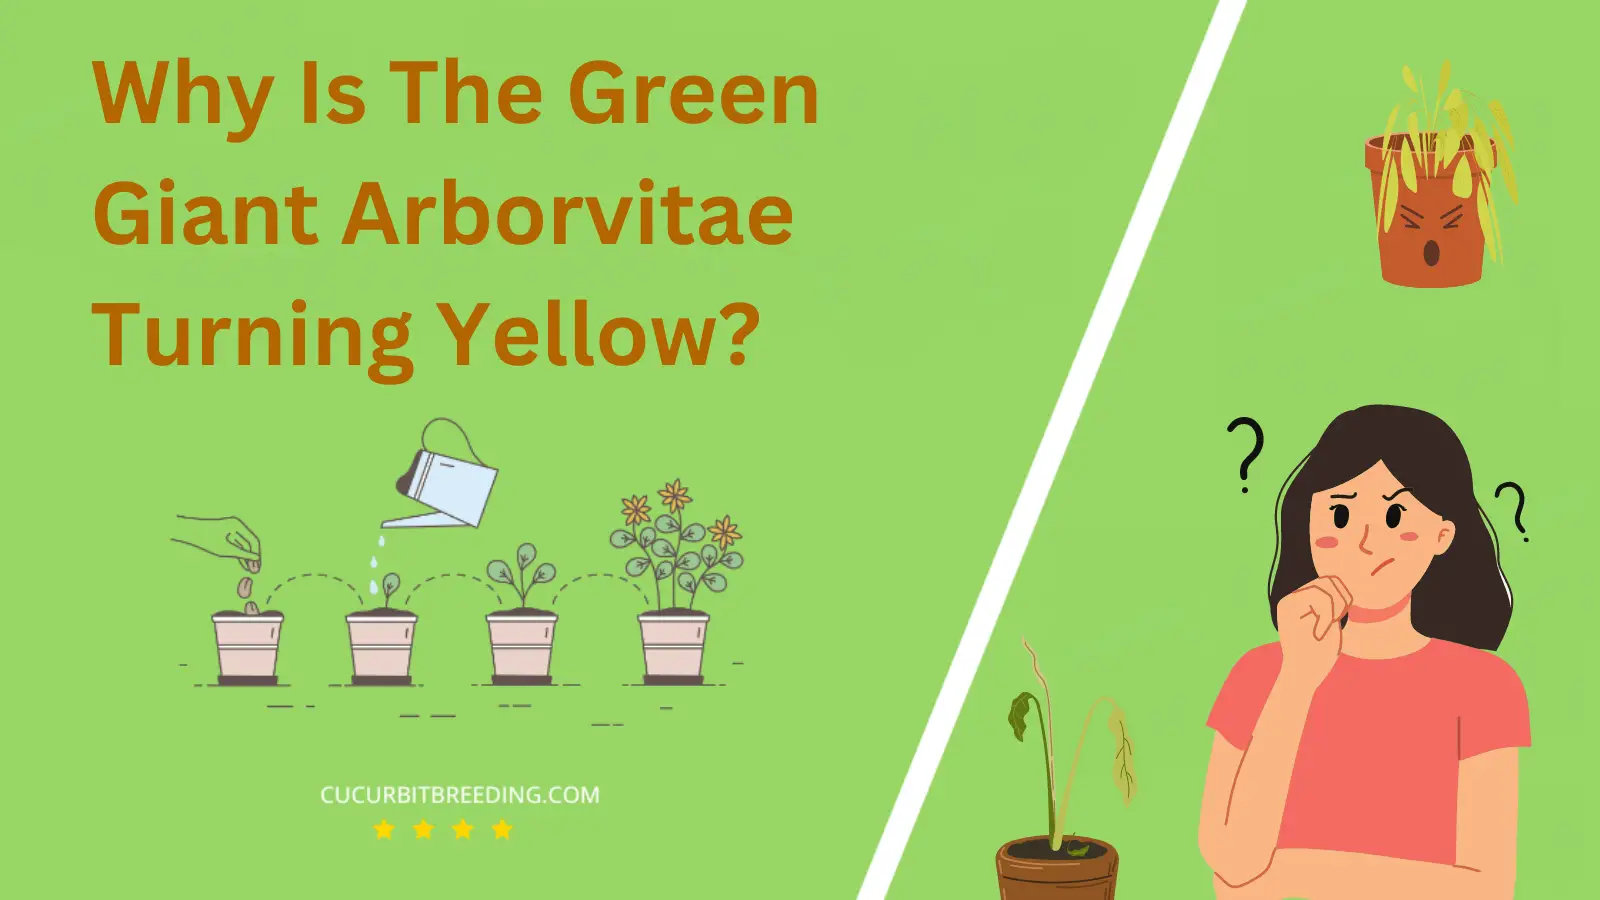 Why Is The Green Giant Arborvitae Turning Yellow